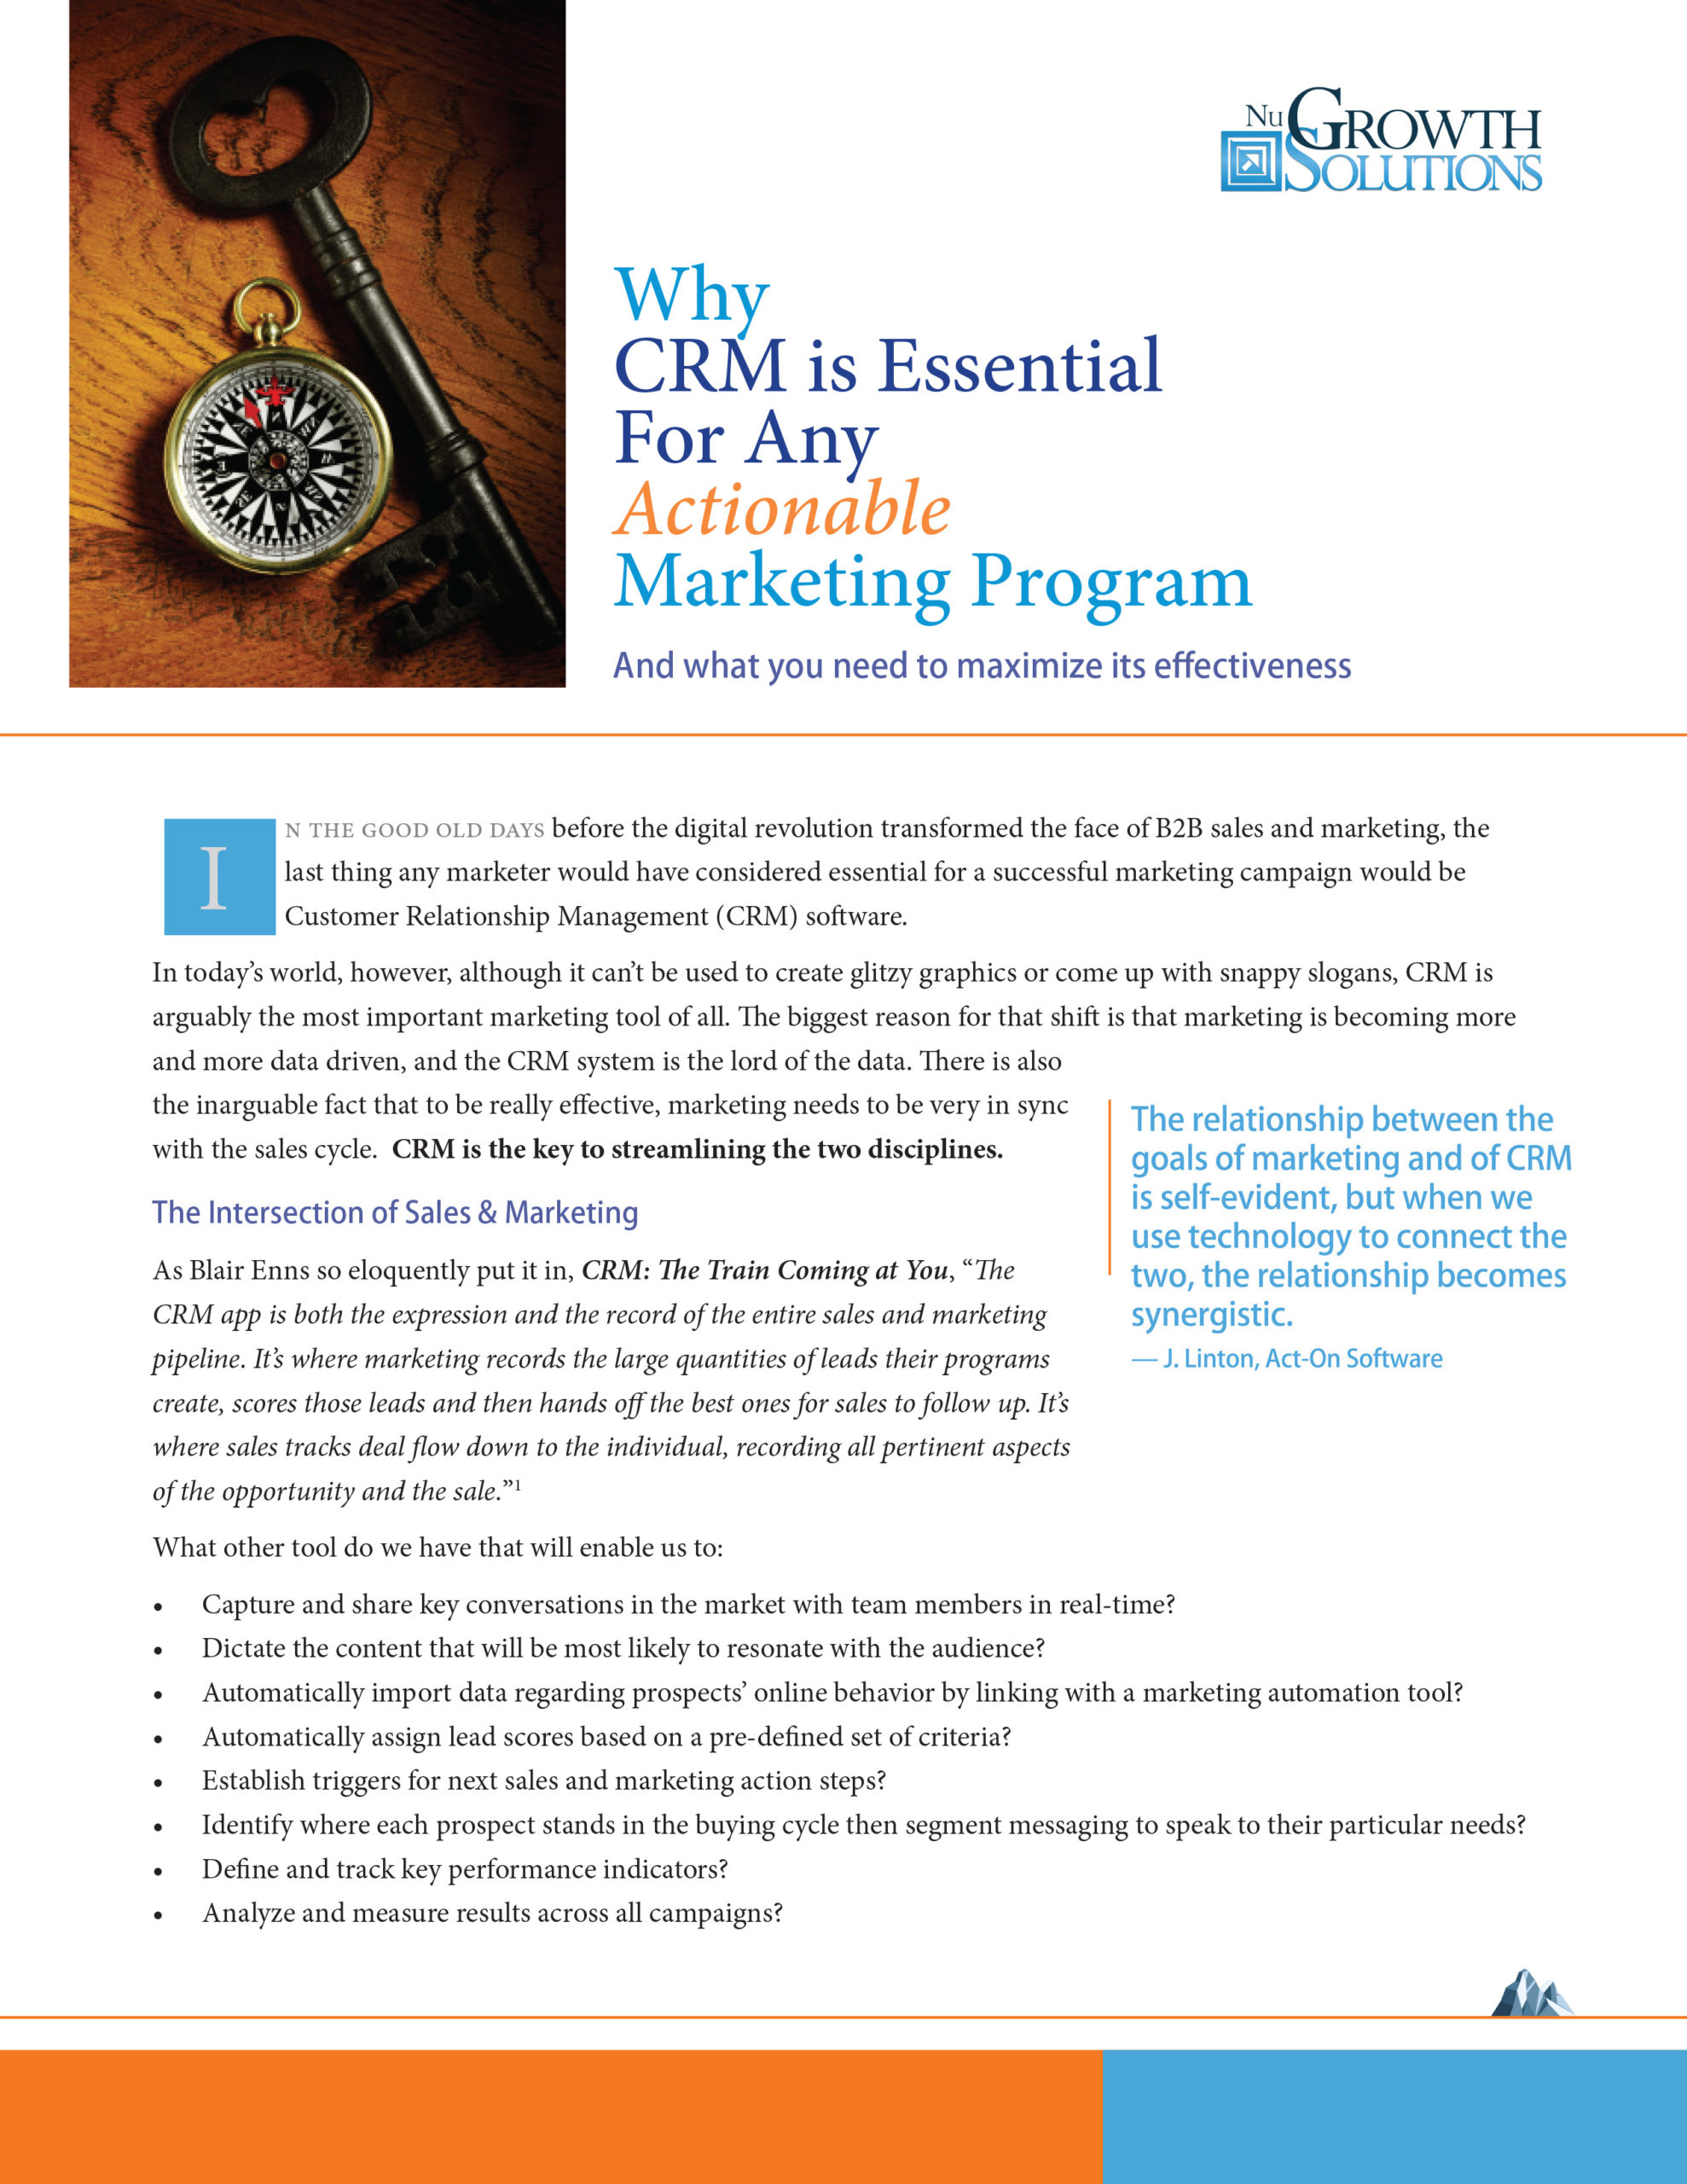 Why-CRM-is-Essential-for-Any-Actionable-Marketing-Program-1